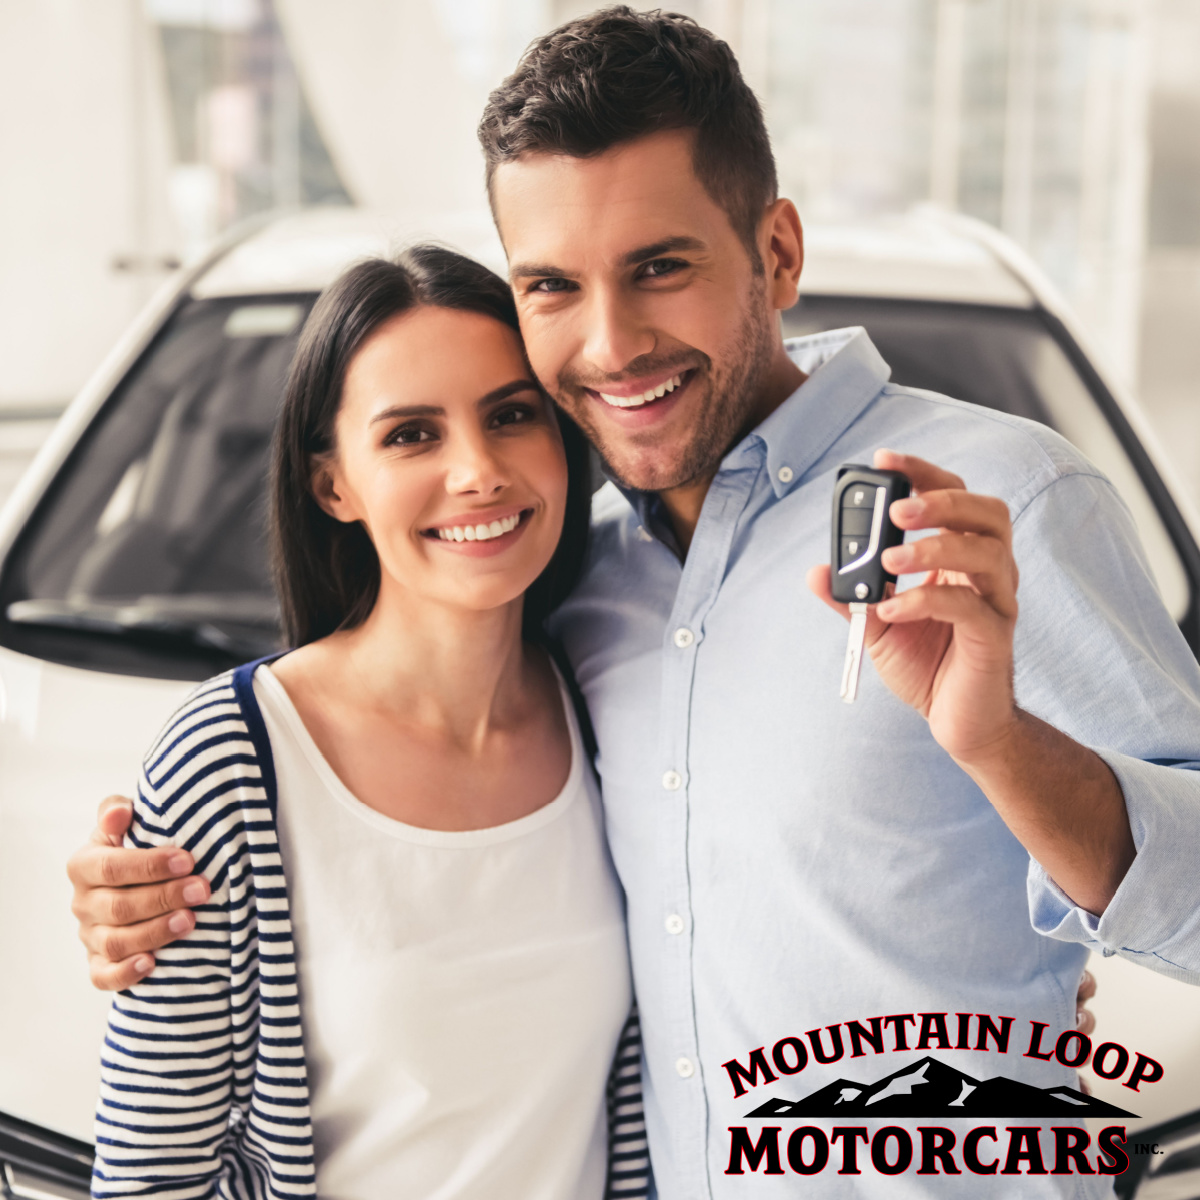 Find Your Dream Car at Mountain Loop Motorcars: Vehicles for Sale Near Lake Stevens